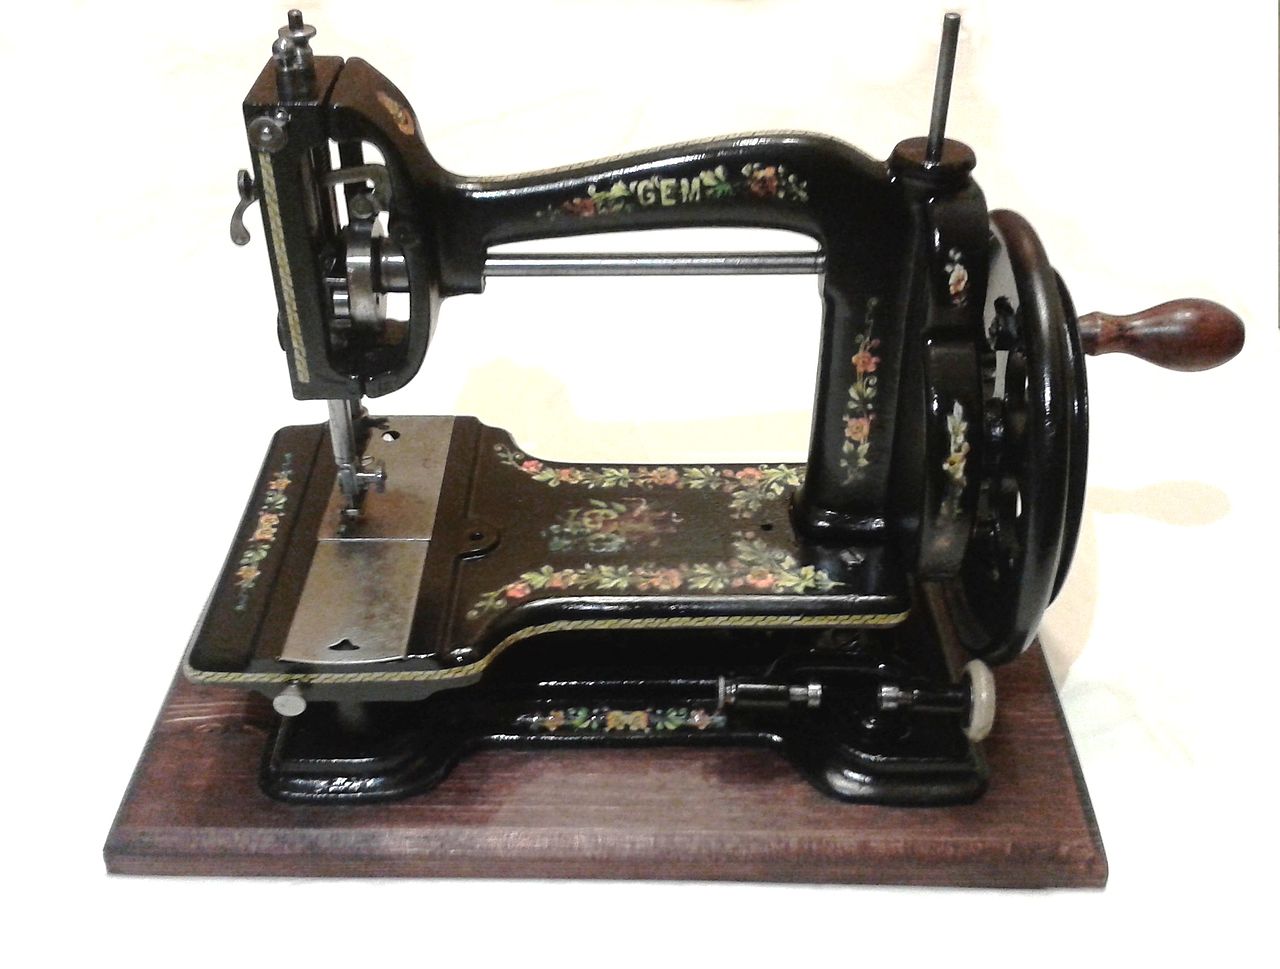 An ornate, cast iron late 19th century sewing machine.